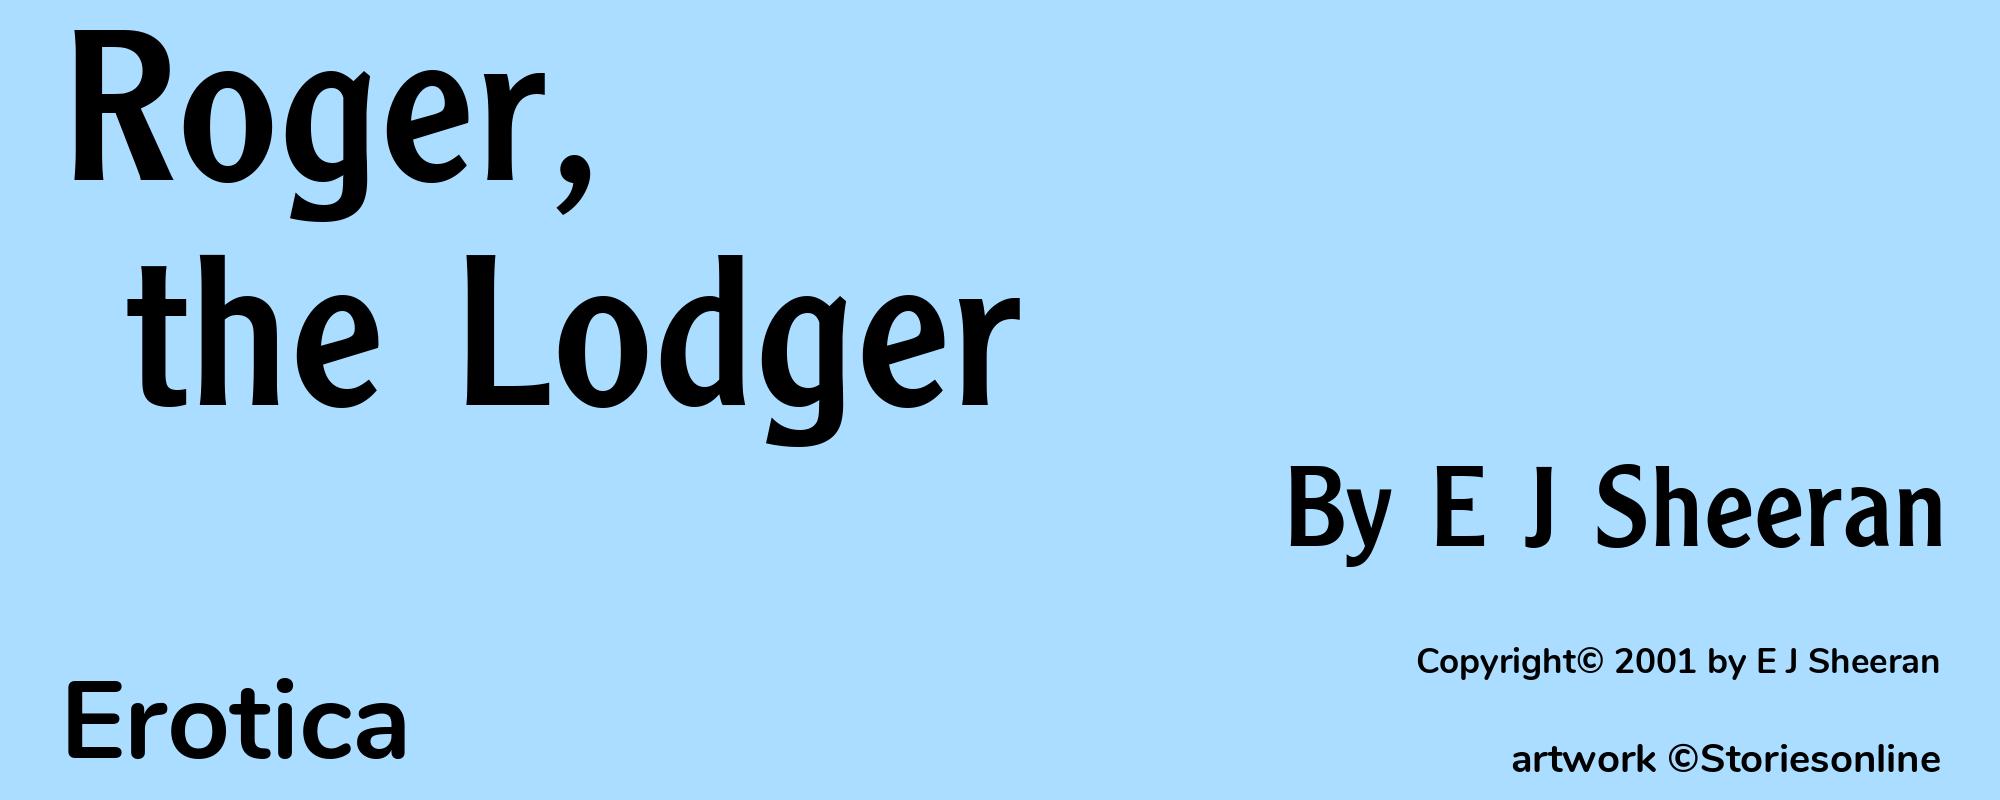 Roger, the Lodger - Cover